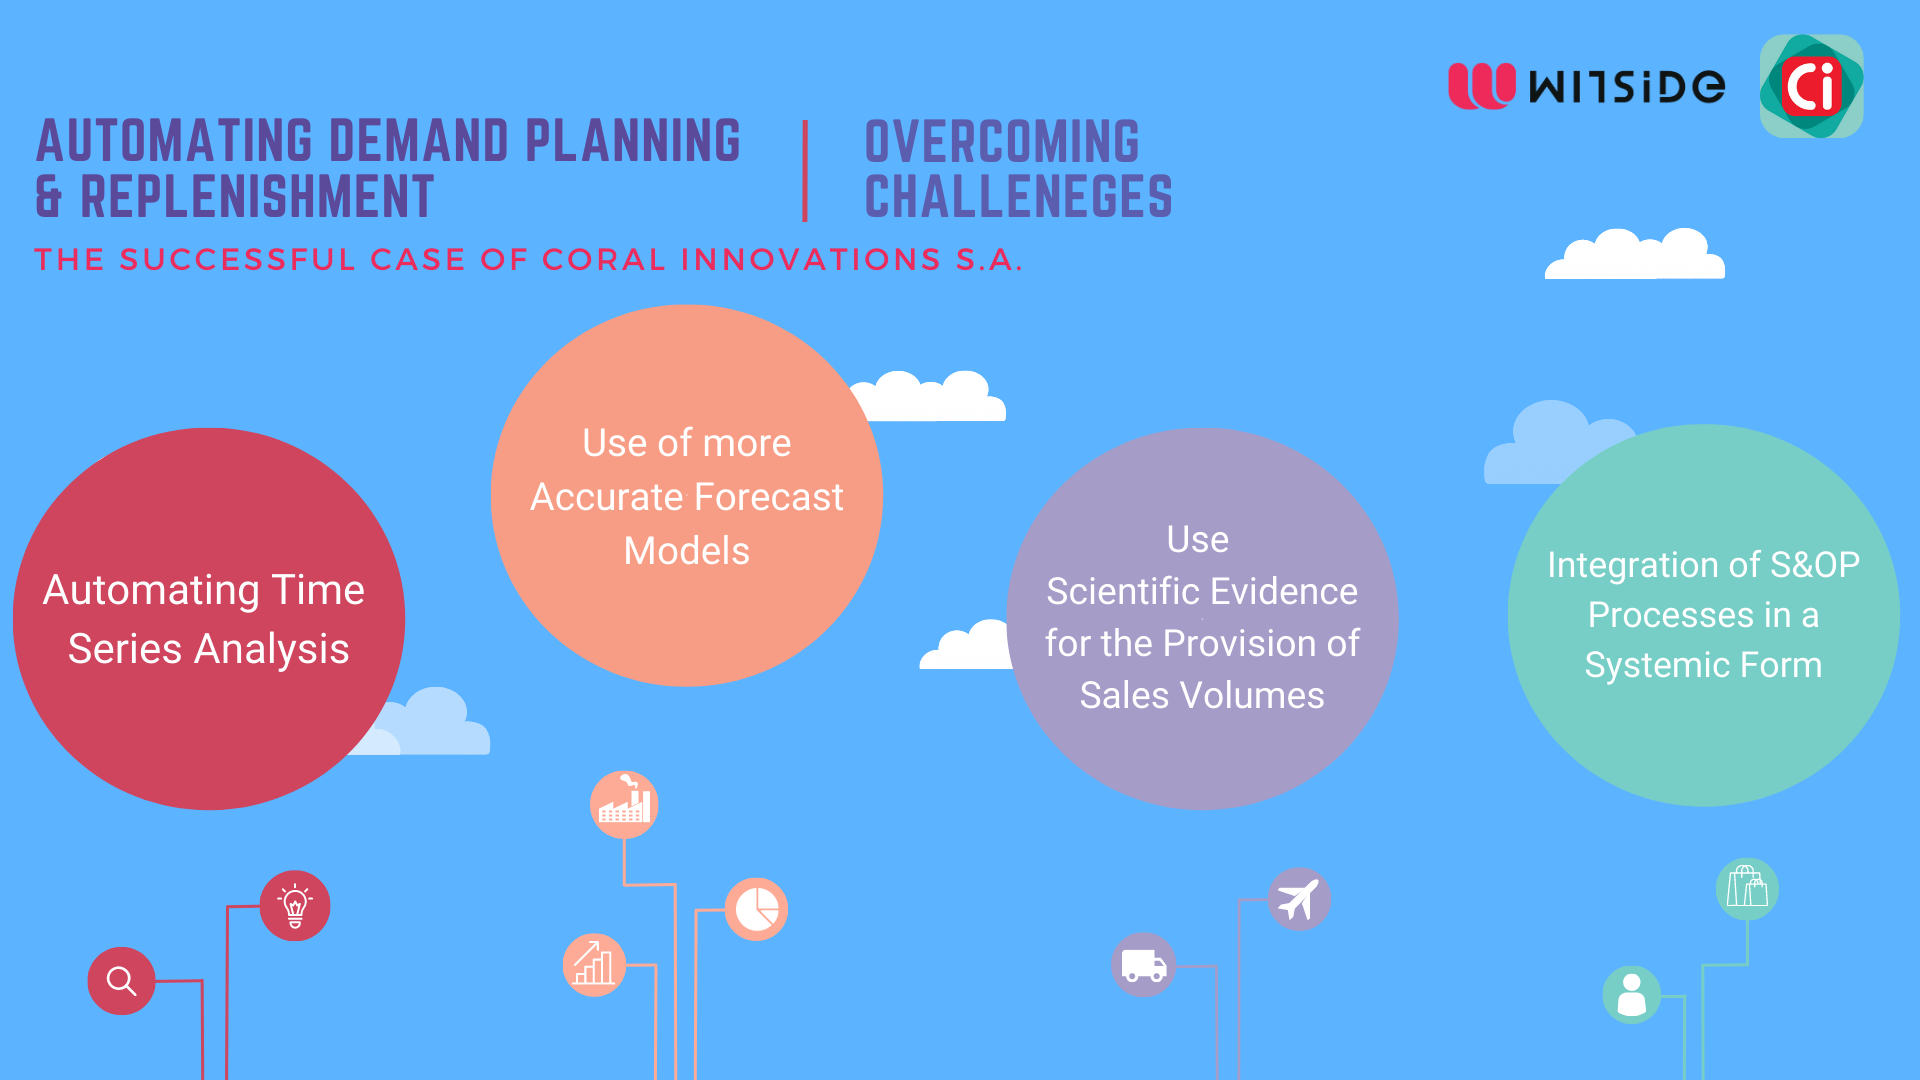 Overcoming the demand planning challenges